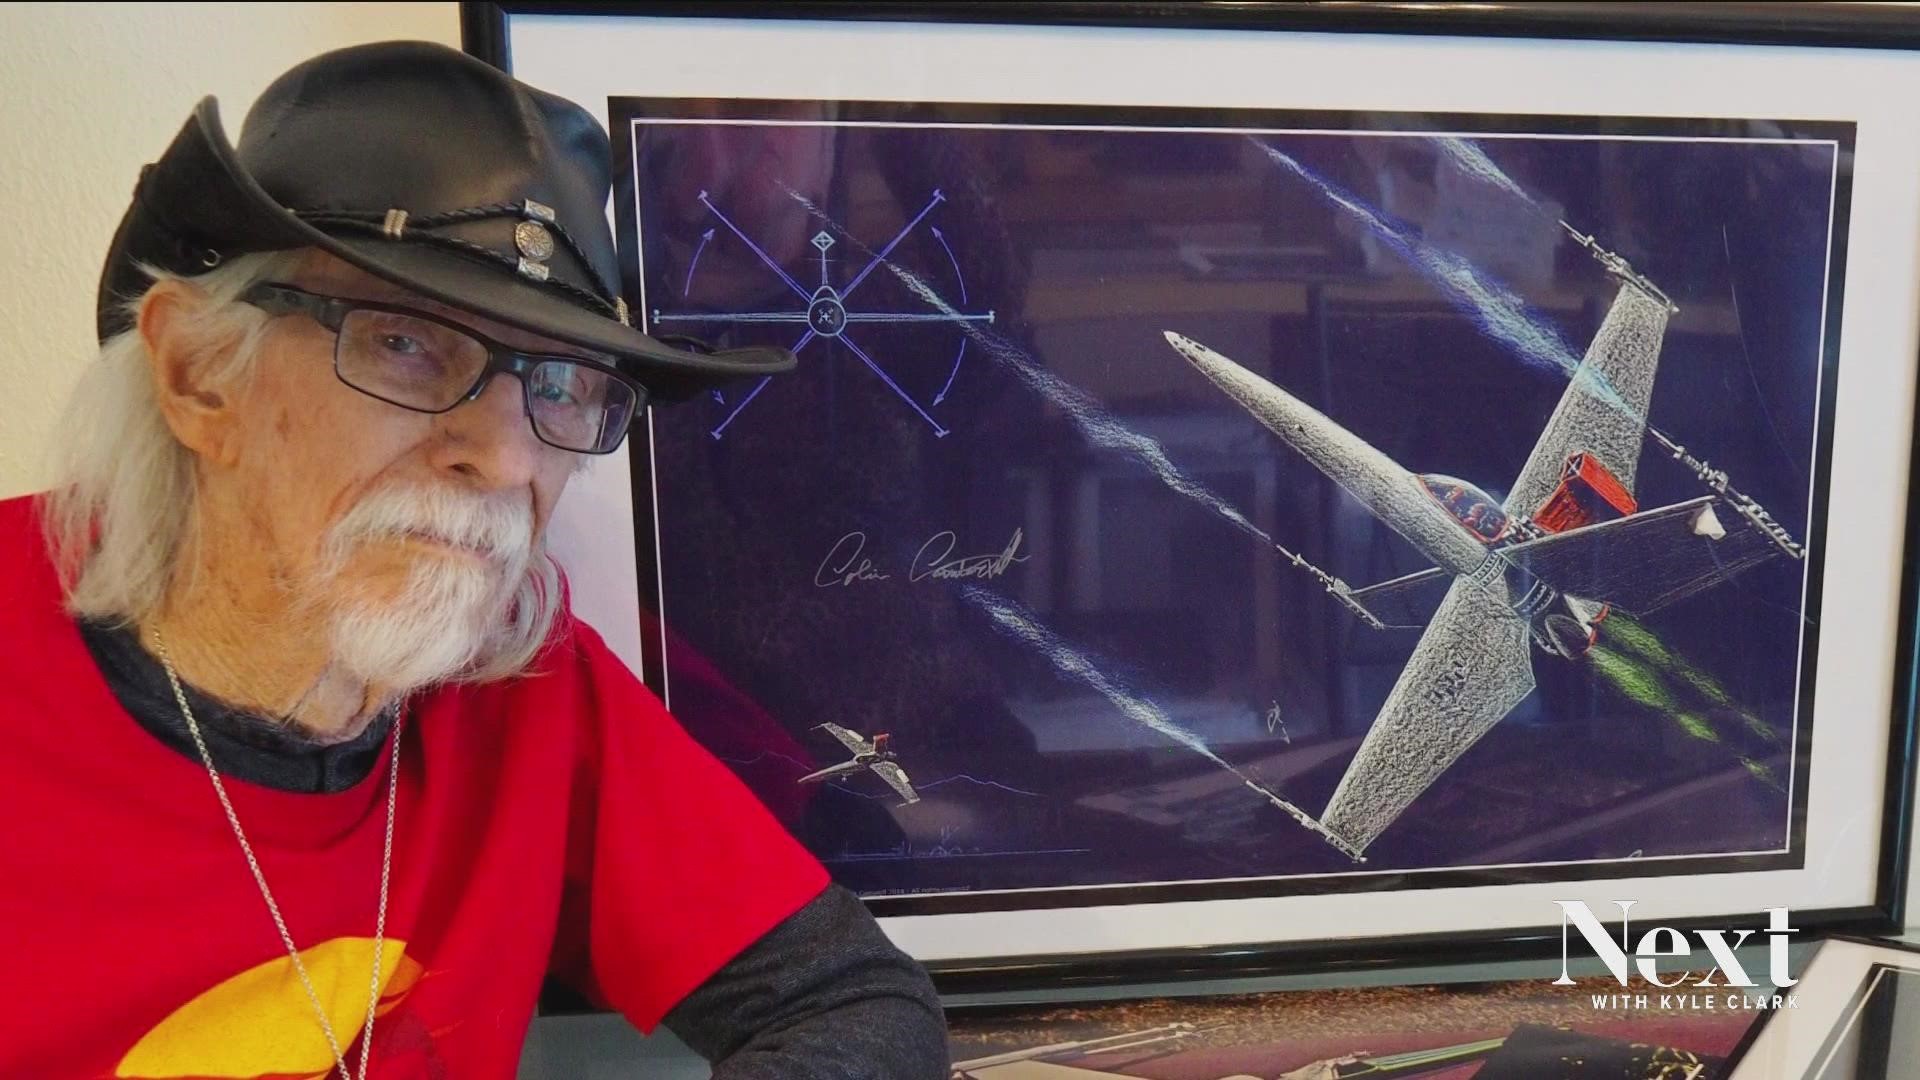 Passions for space and architecture landed him a job in Hollywood designing the X-Wing and Death Star for "Star Wars." Over the weekend, Colin Cantwell, 90, died.